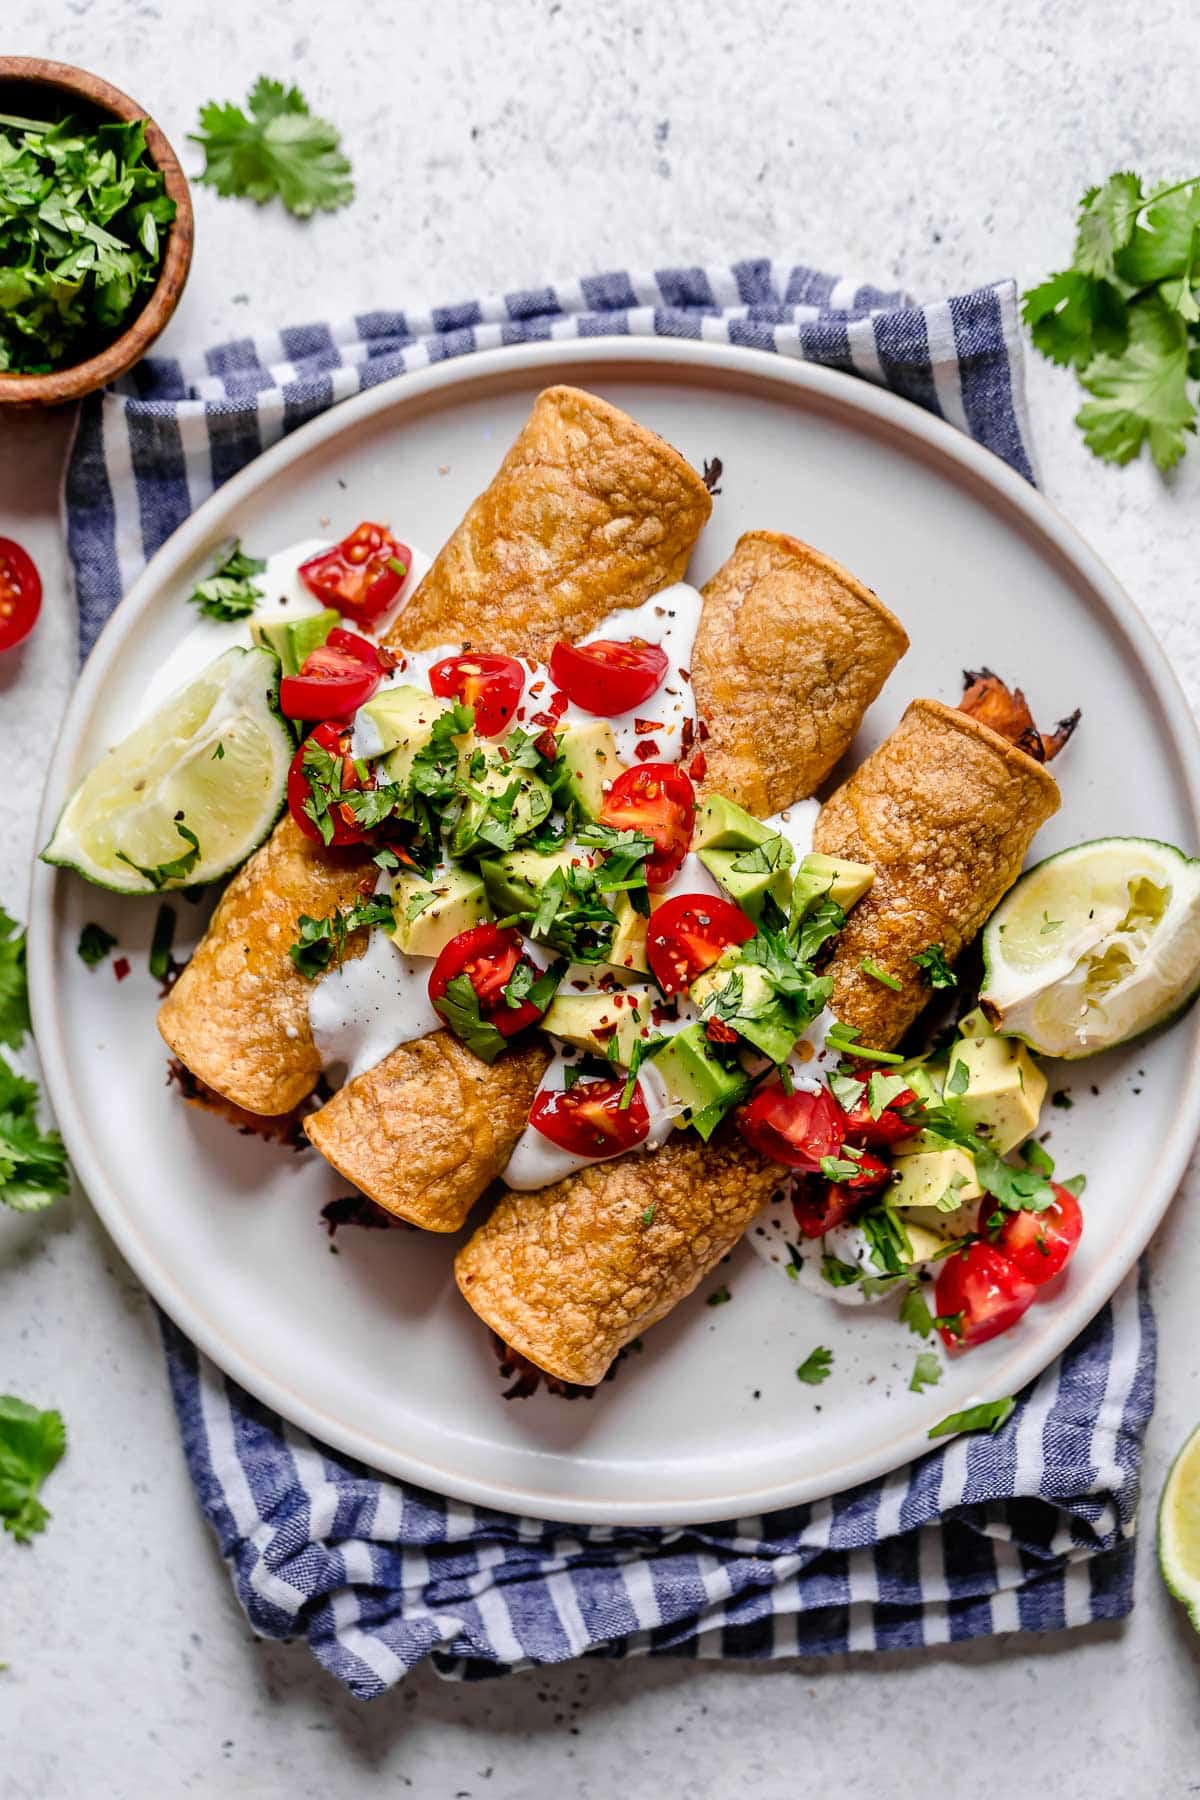 Taquitos on a white plate topped with sour cream, tomatoes, avocados and cilantro. Lime wedges are set of to the side and plate is set on a blue striped napkin.